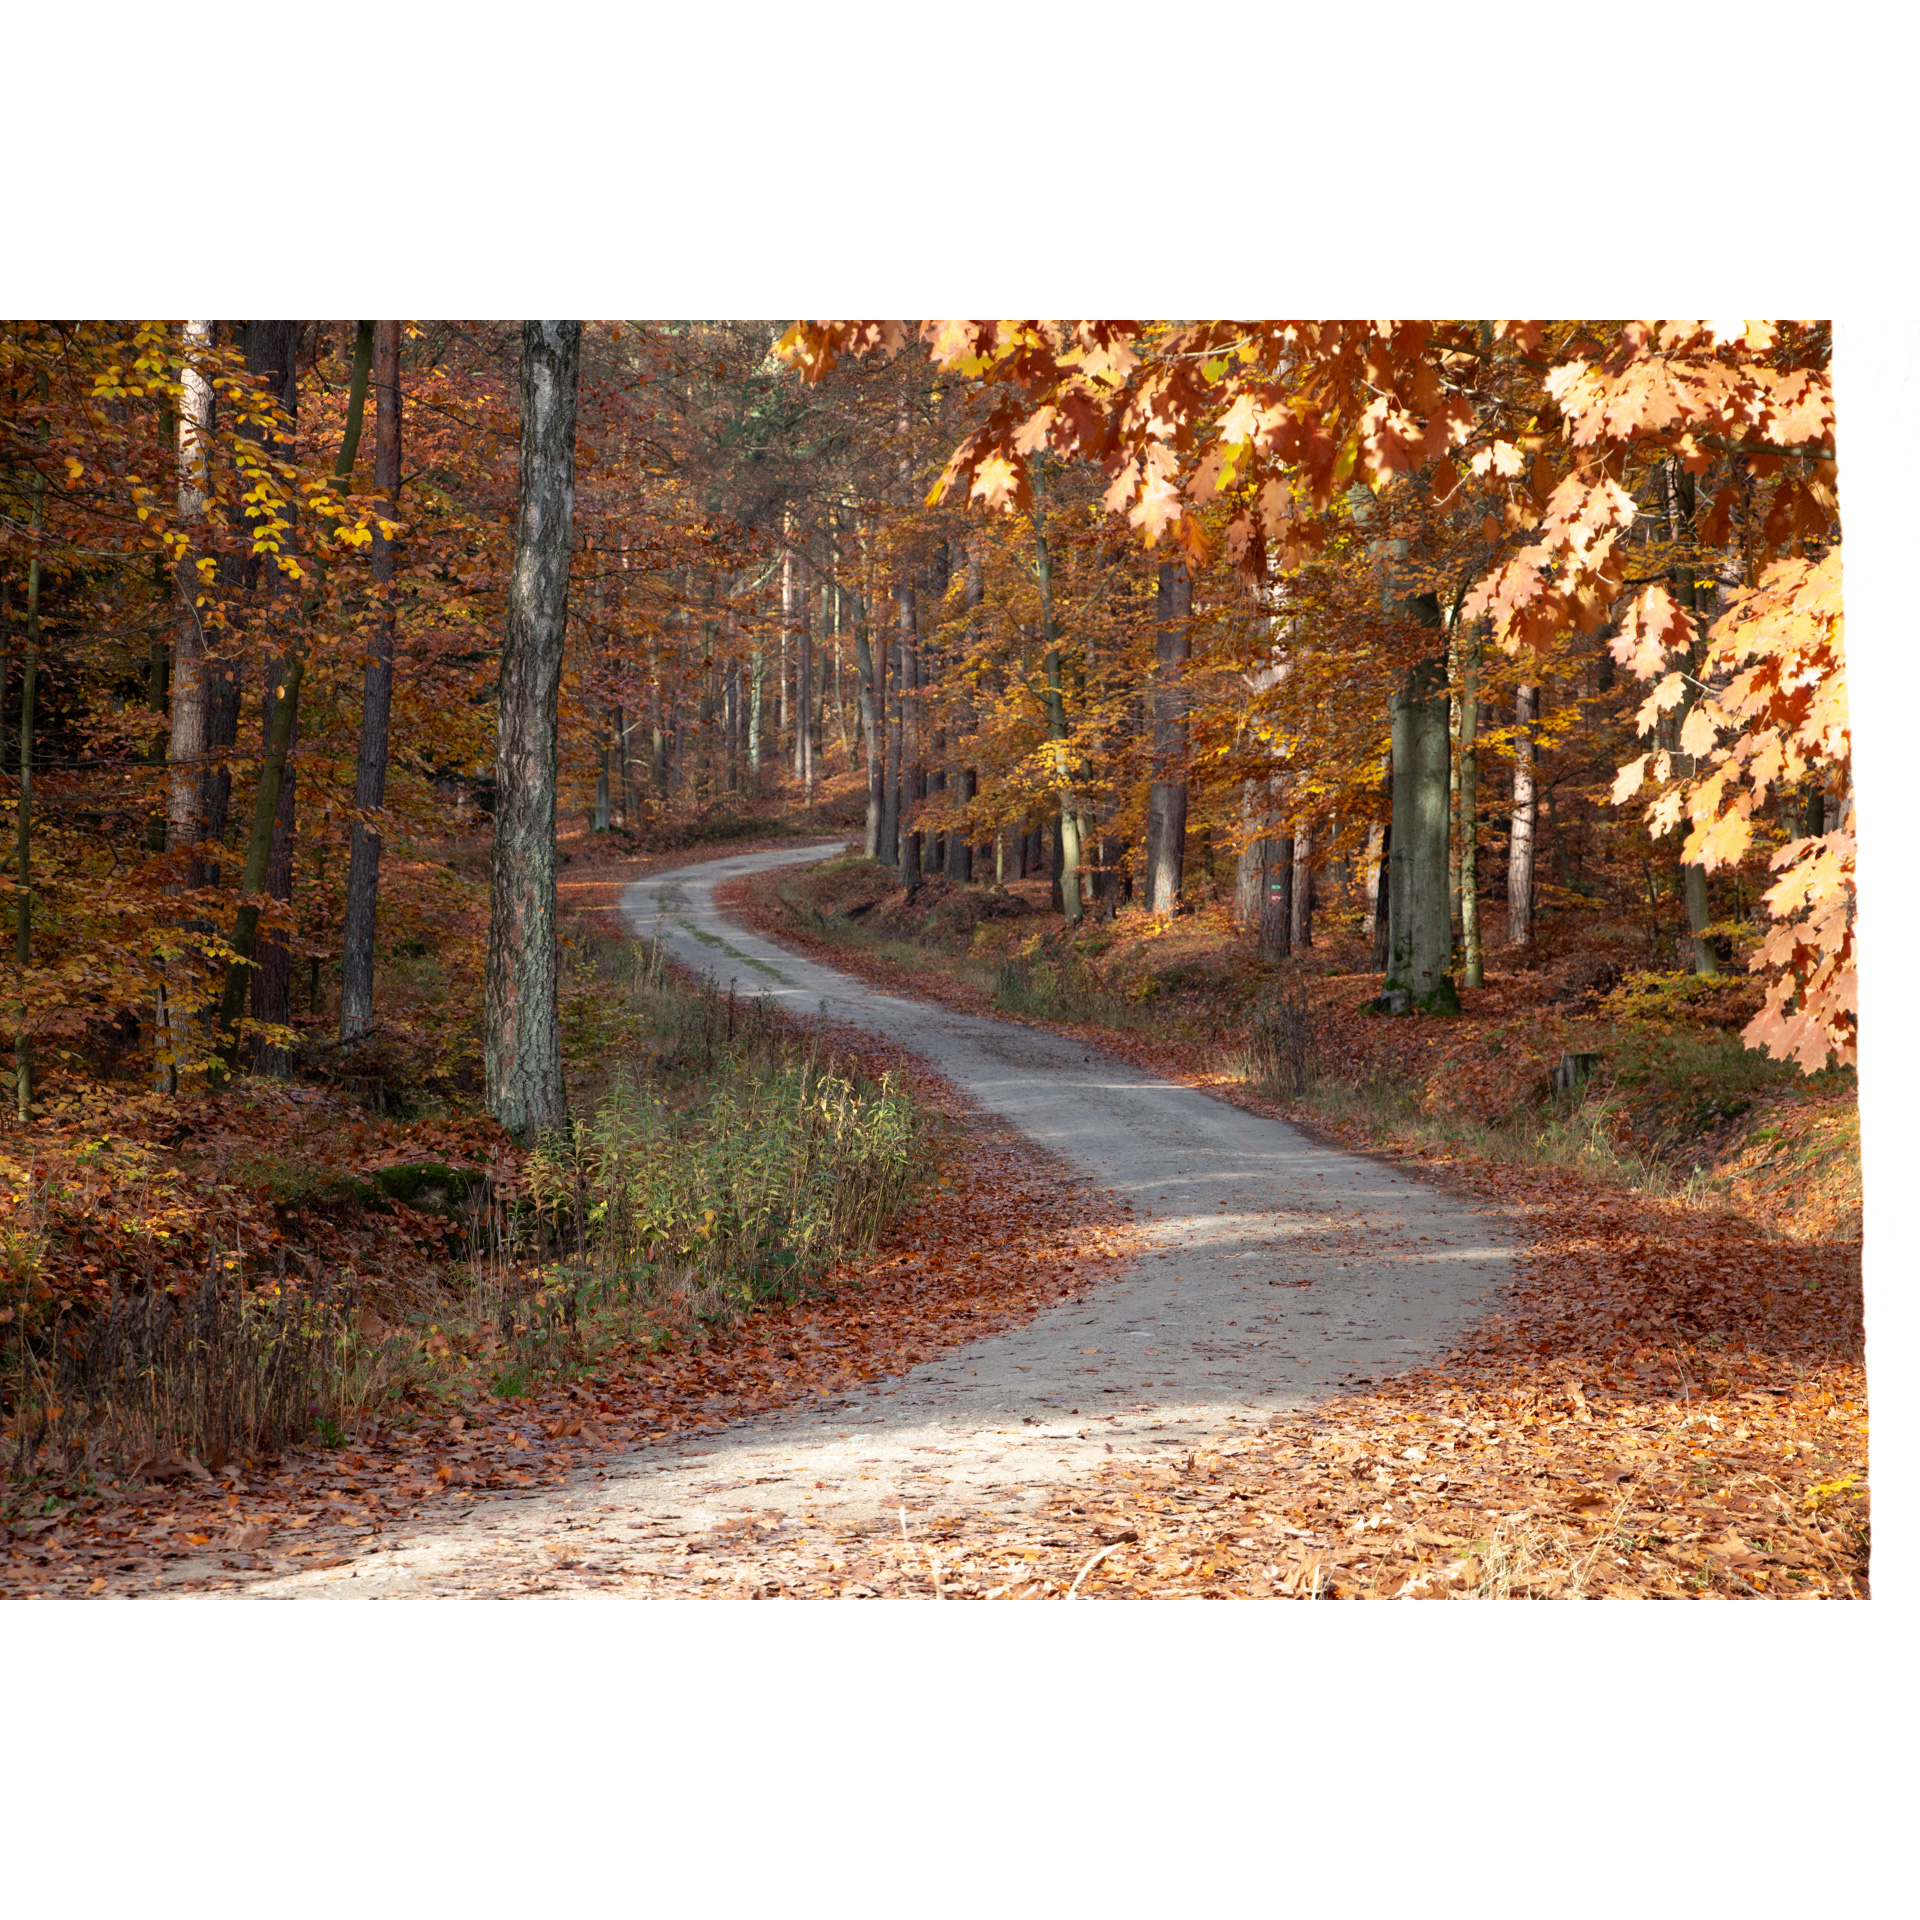 Paved road leading through the autumn forest in orange and yellow colors